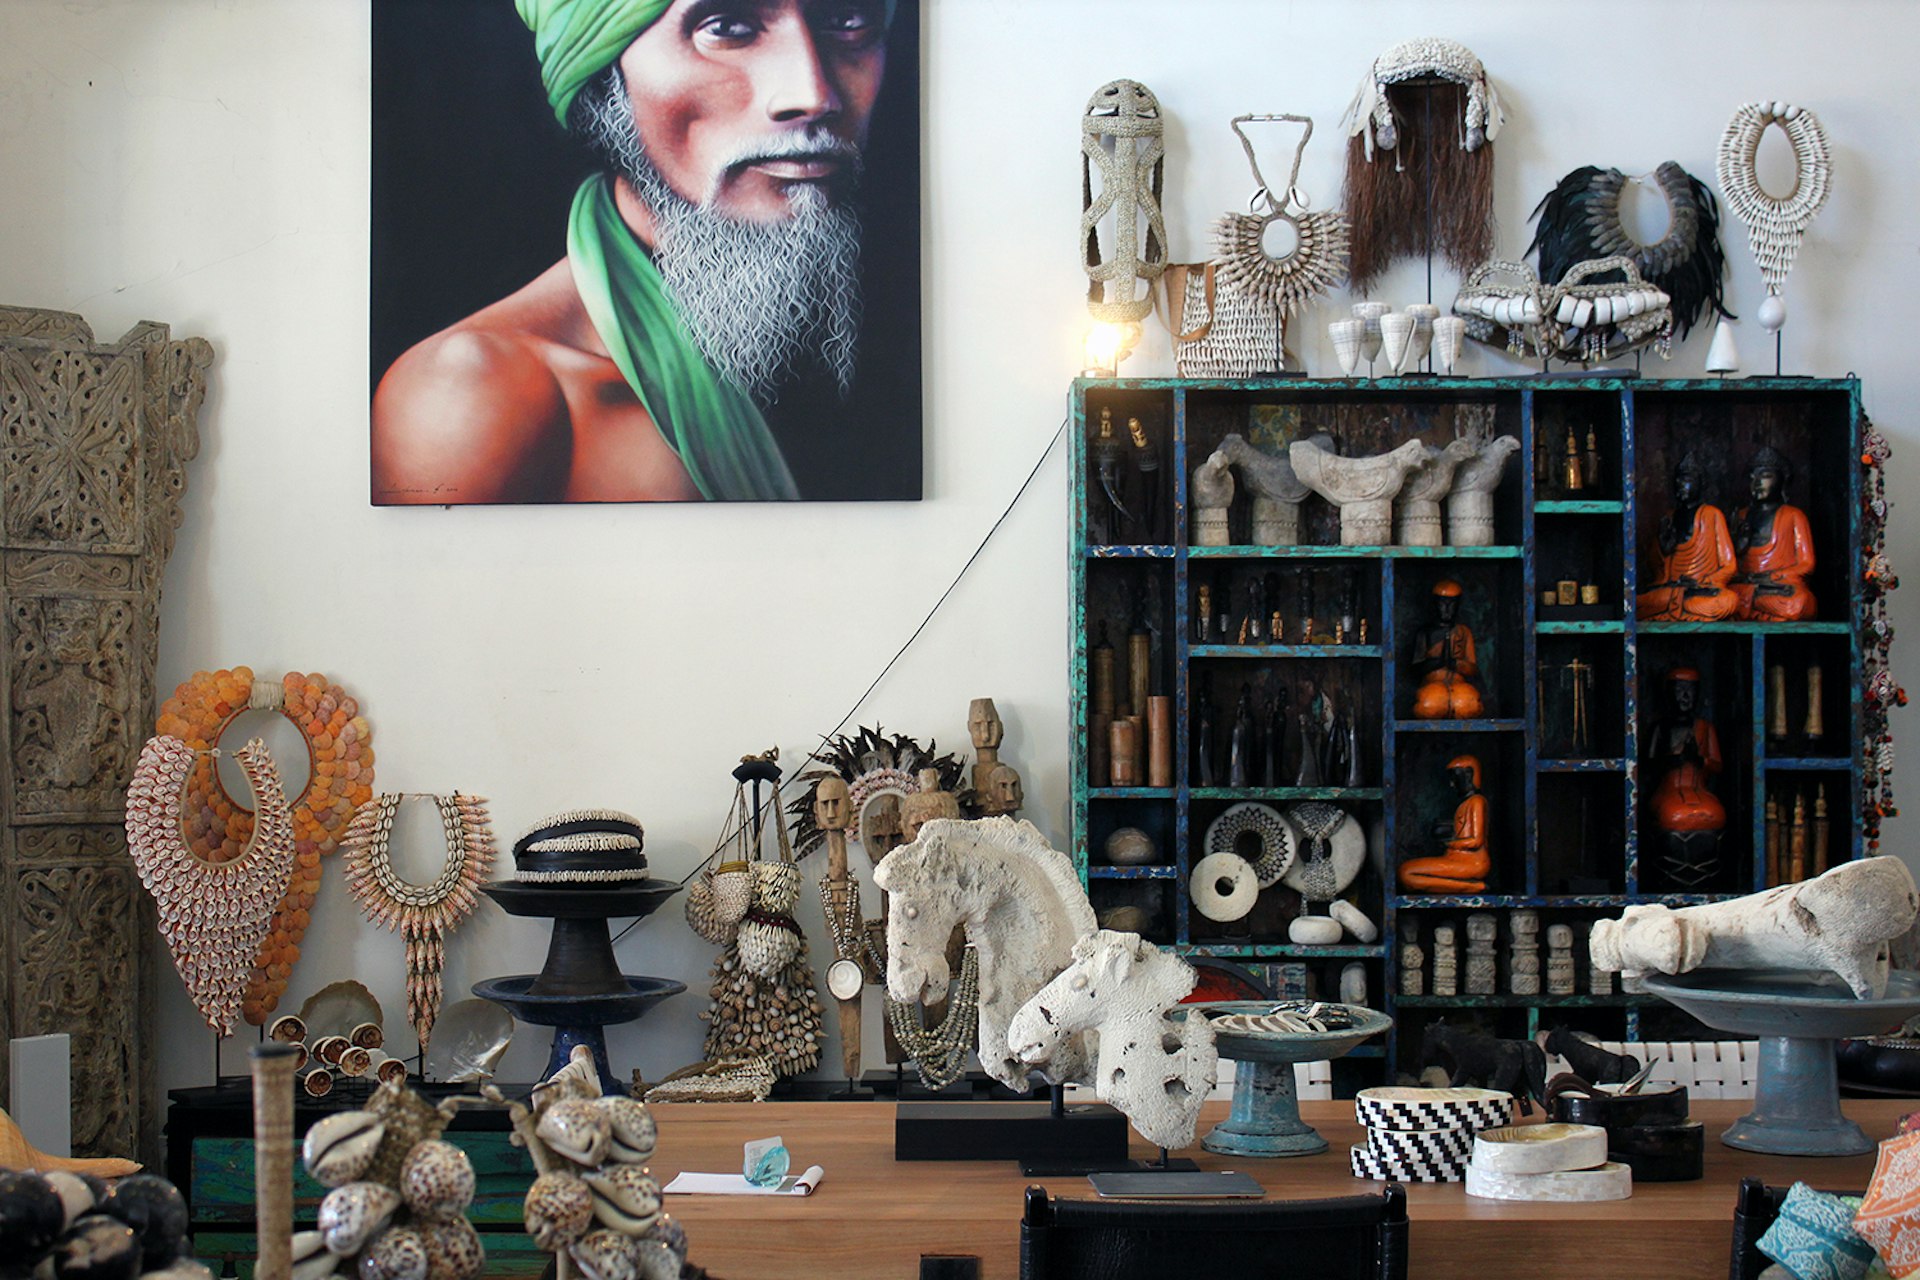 Timeless designs with a spiritual feel at Saya Gallery in Seminyak, Bali. Image by Samantha Chalker / Lonely Planet